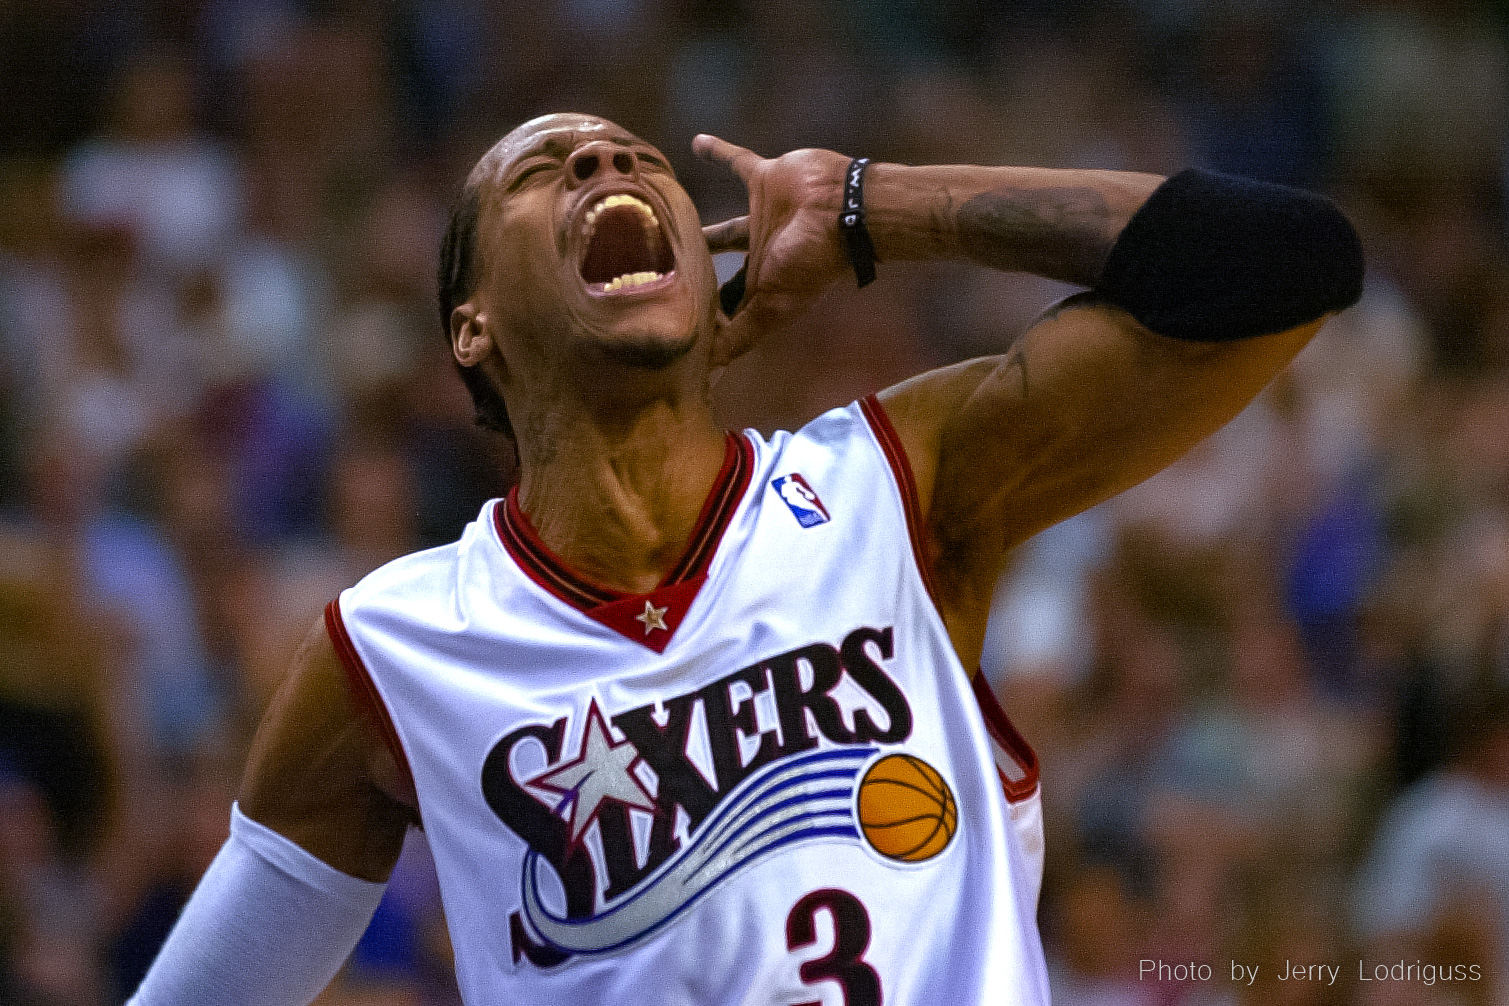 The Philadelphia 76ers Allen Iverson lets out a primal scream during his 52-point effort in the Sixers 121-88 victory over the Toronto Raptors in game 5 of their NBA playoff series.